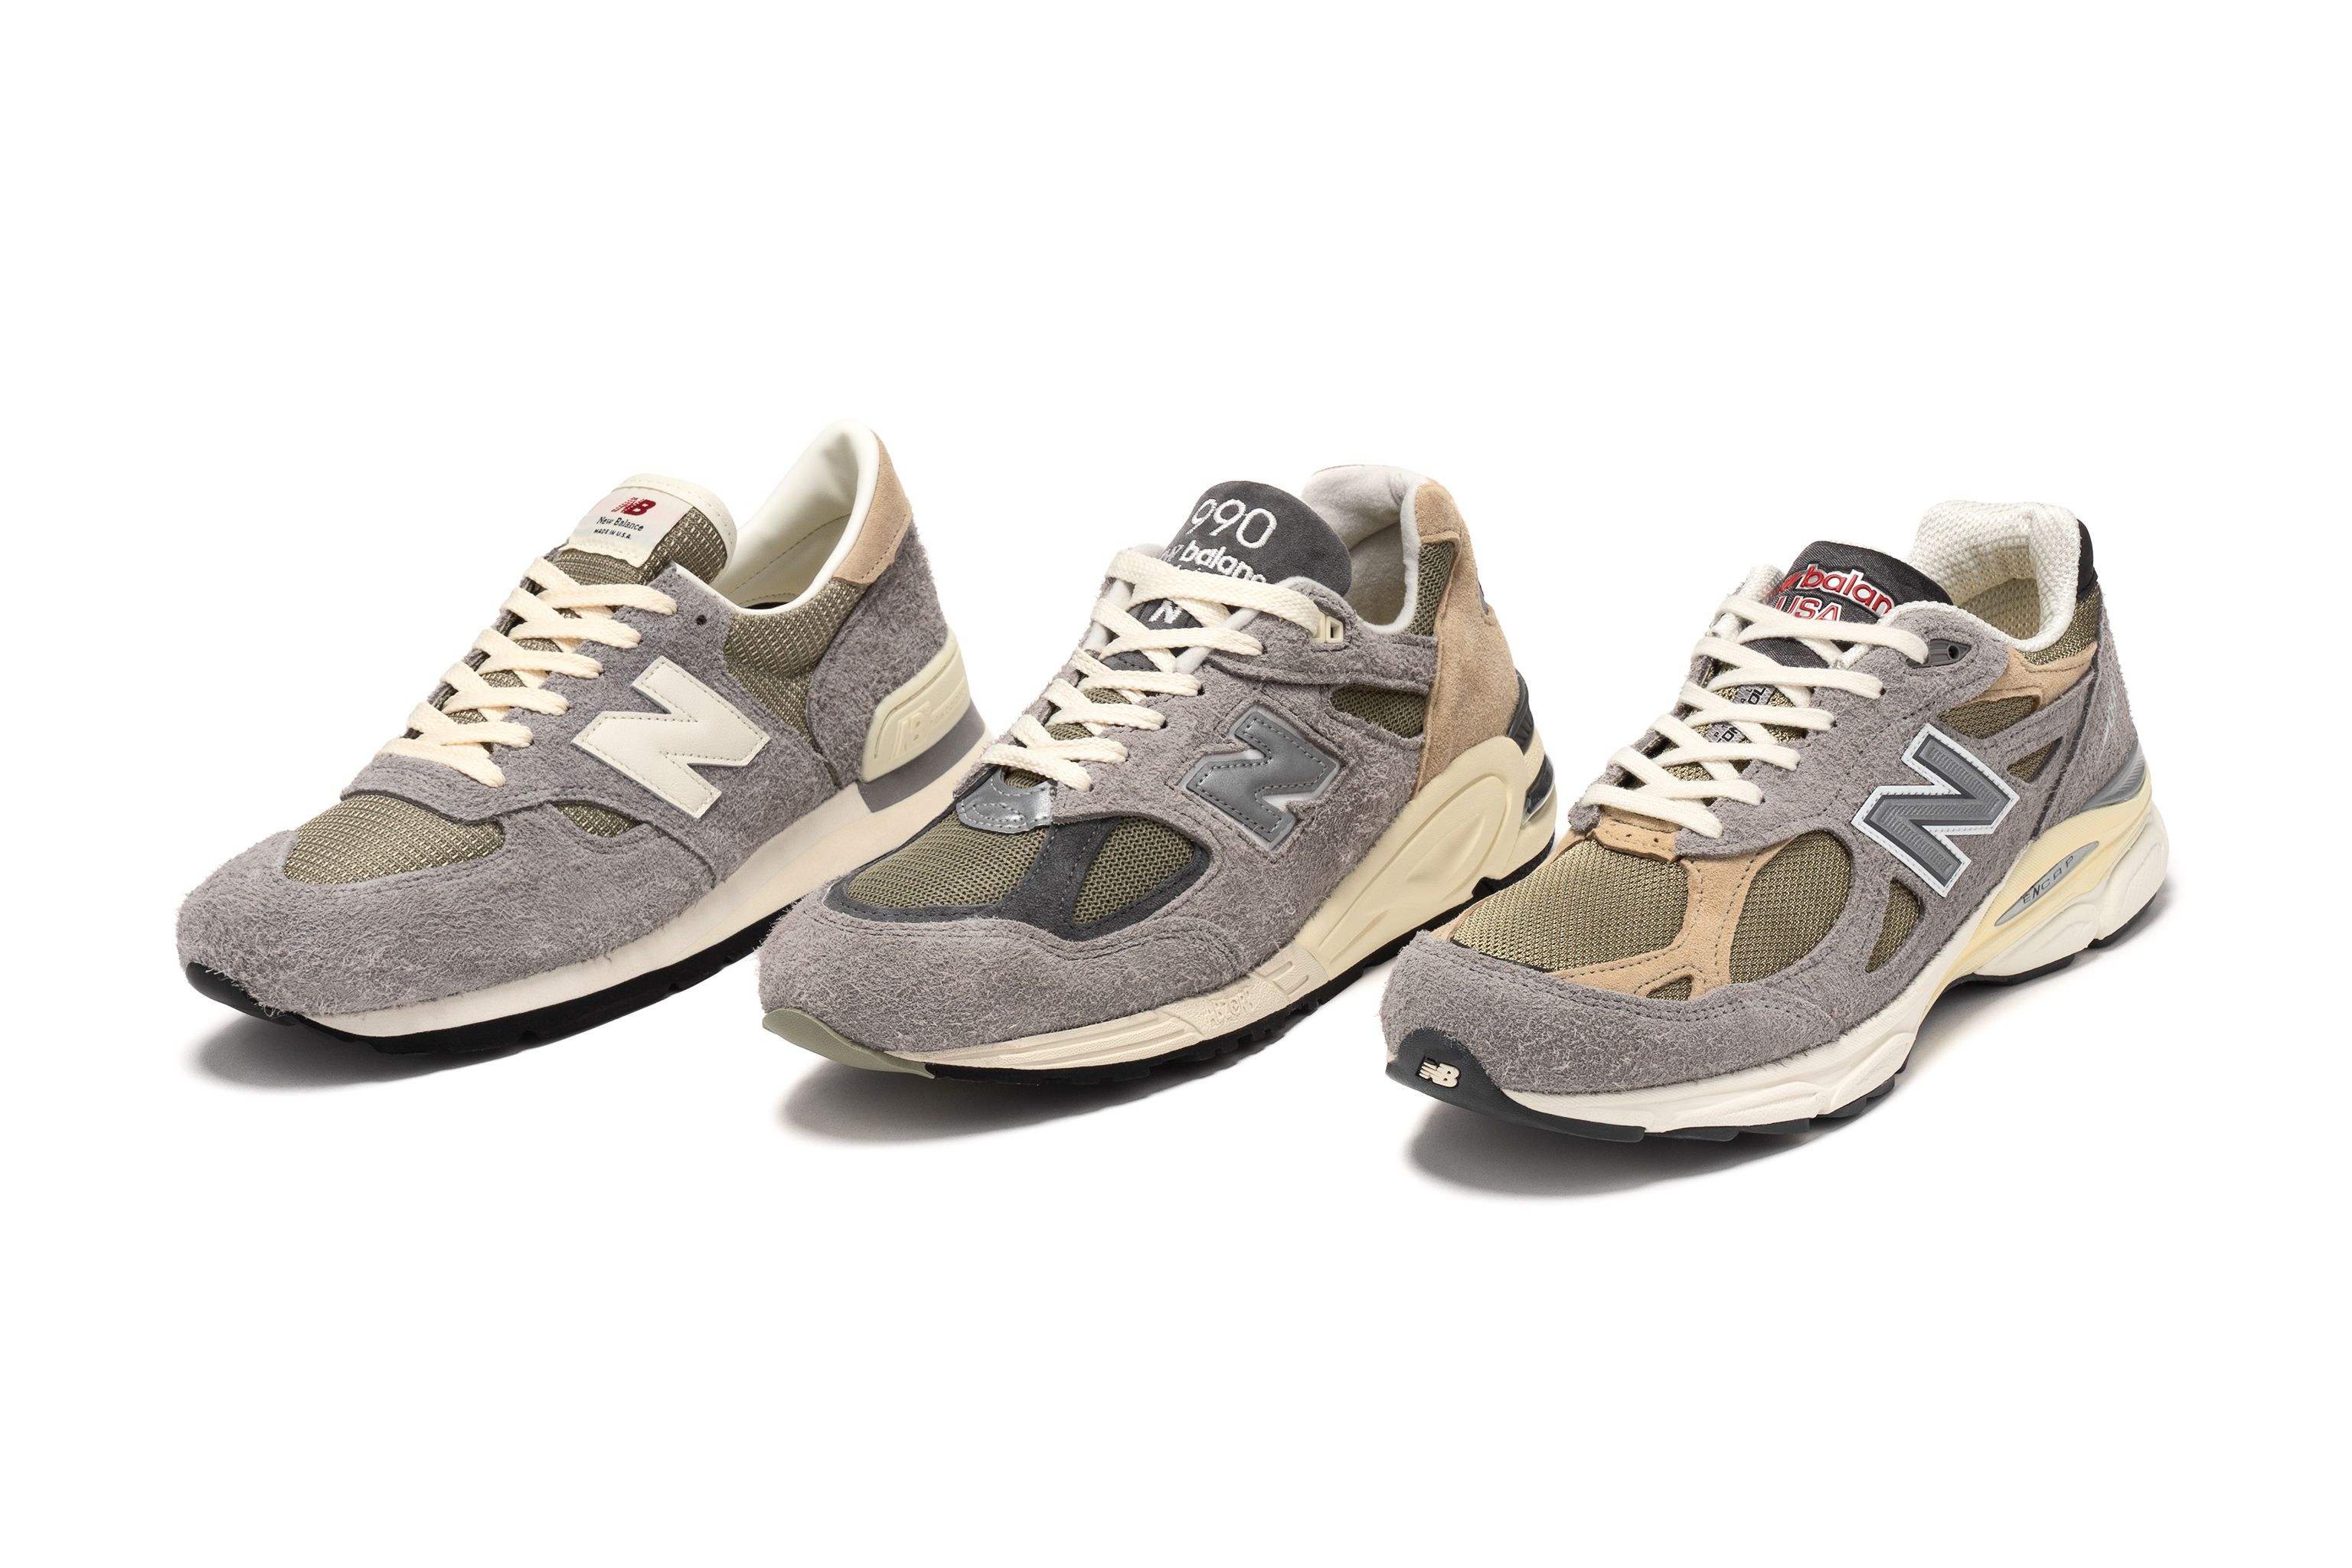 New Balance x Teddy Santis Made in USA 990 Collection | Release